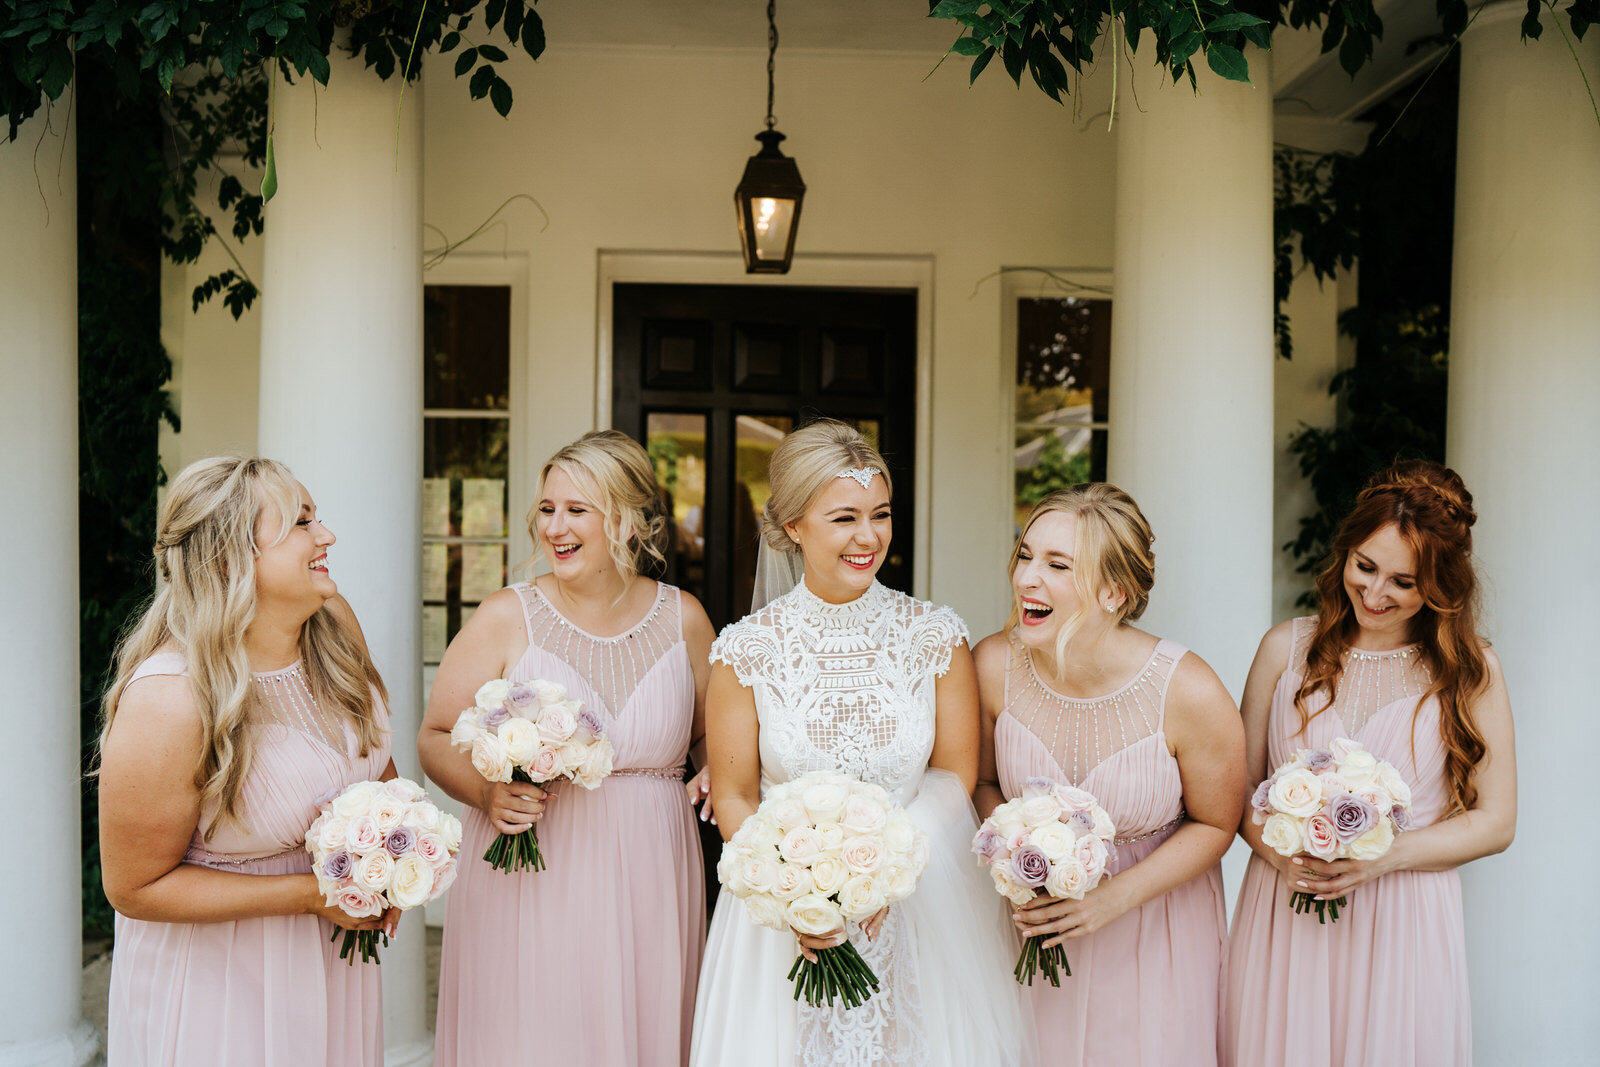 Bride and bridesmaids stand under lush foliage at entrance of Pembroke Lodge and smile at each other